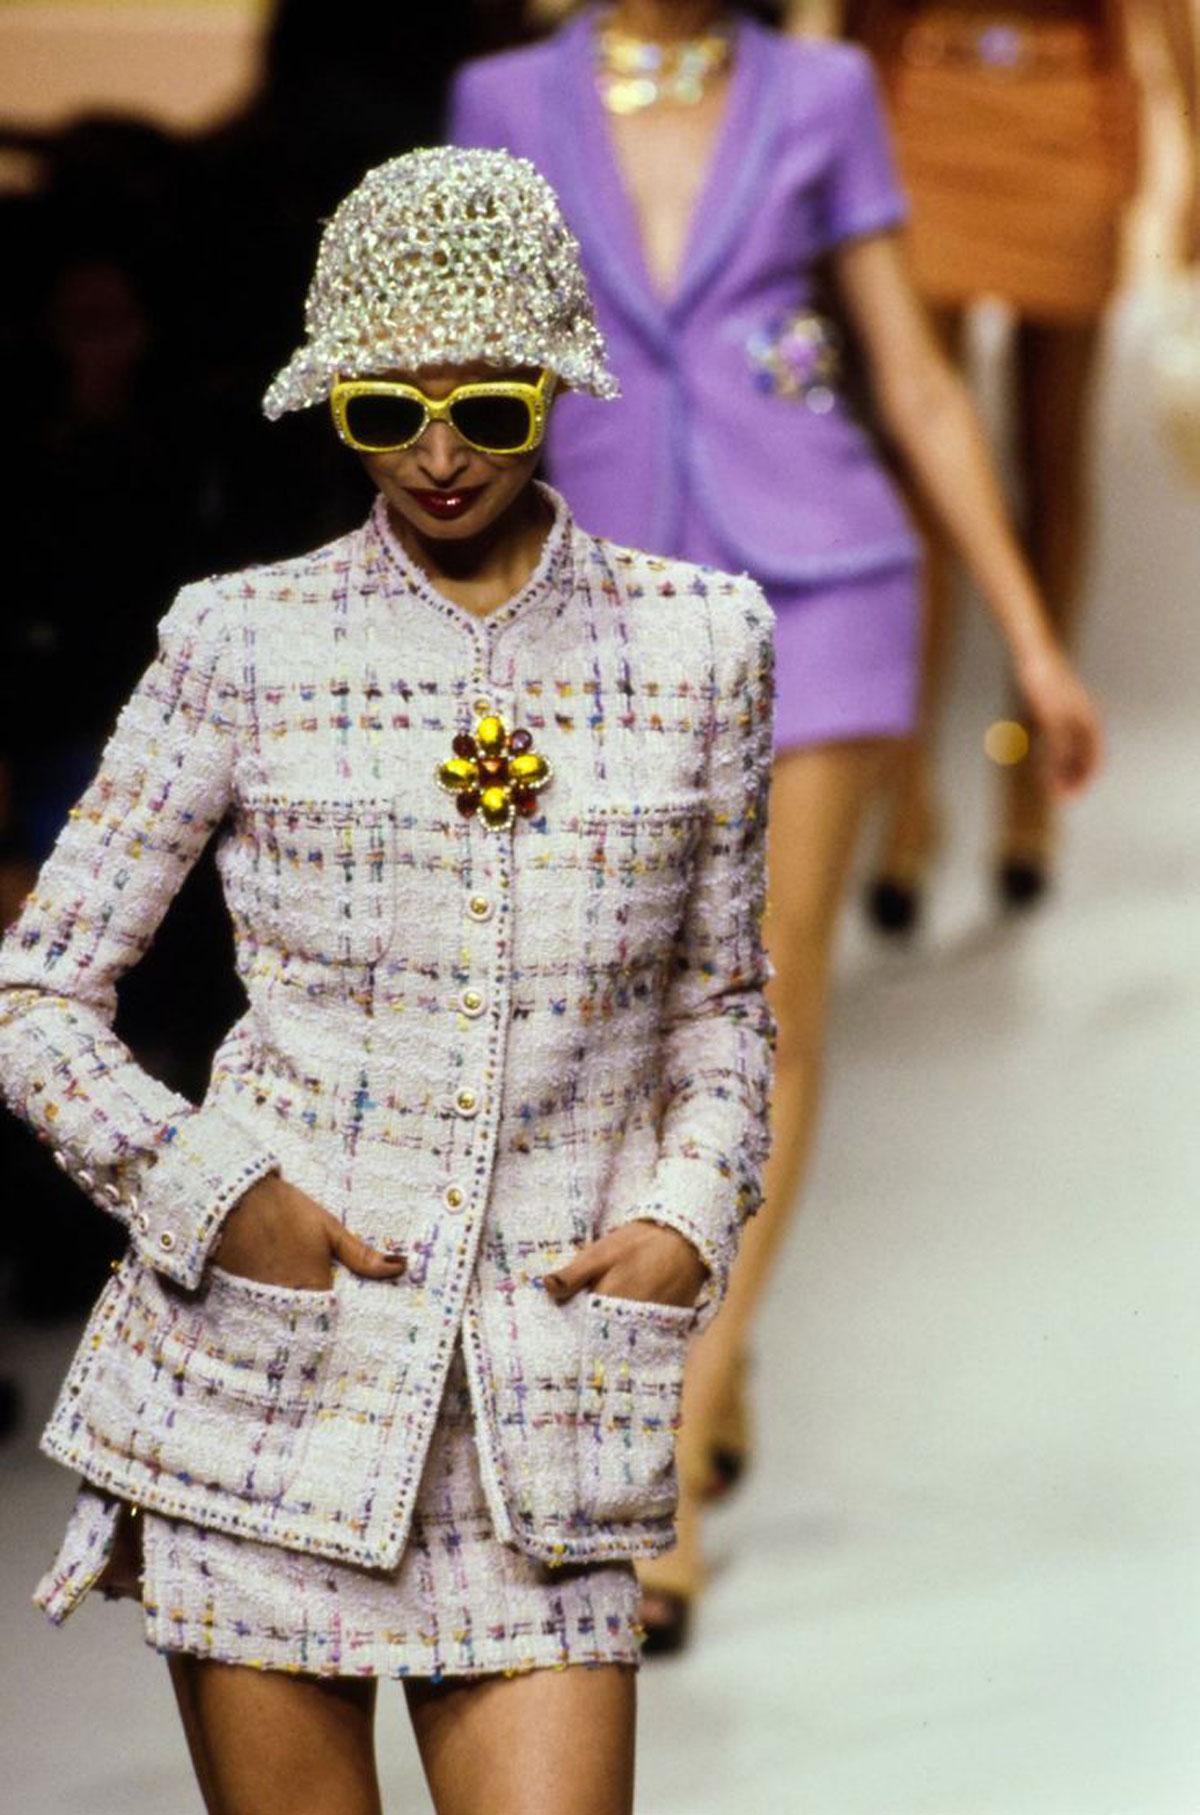 Chanel 1995 Spring Runway Vintage Iridescent Clear Transparent Woven Barbie Hat

Year: 1990s

Transparent Iridescent woven hat from the Karl Lagerfeld era

Made in France